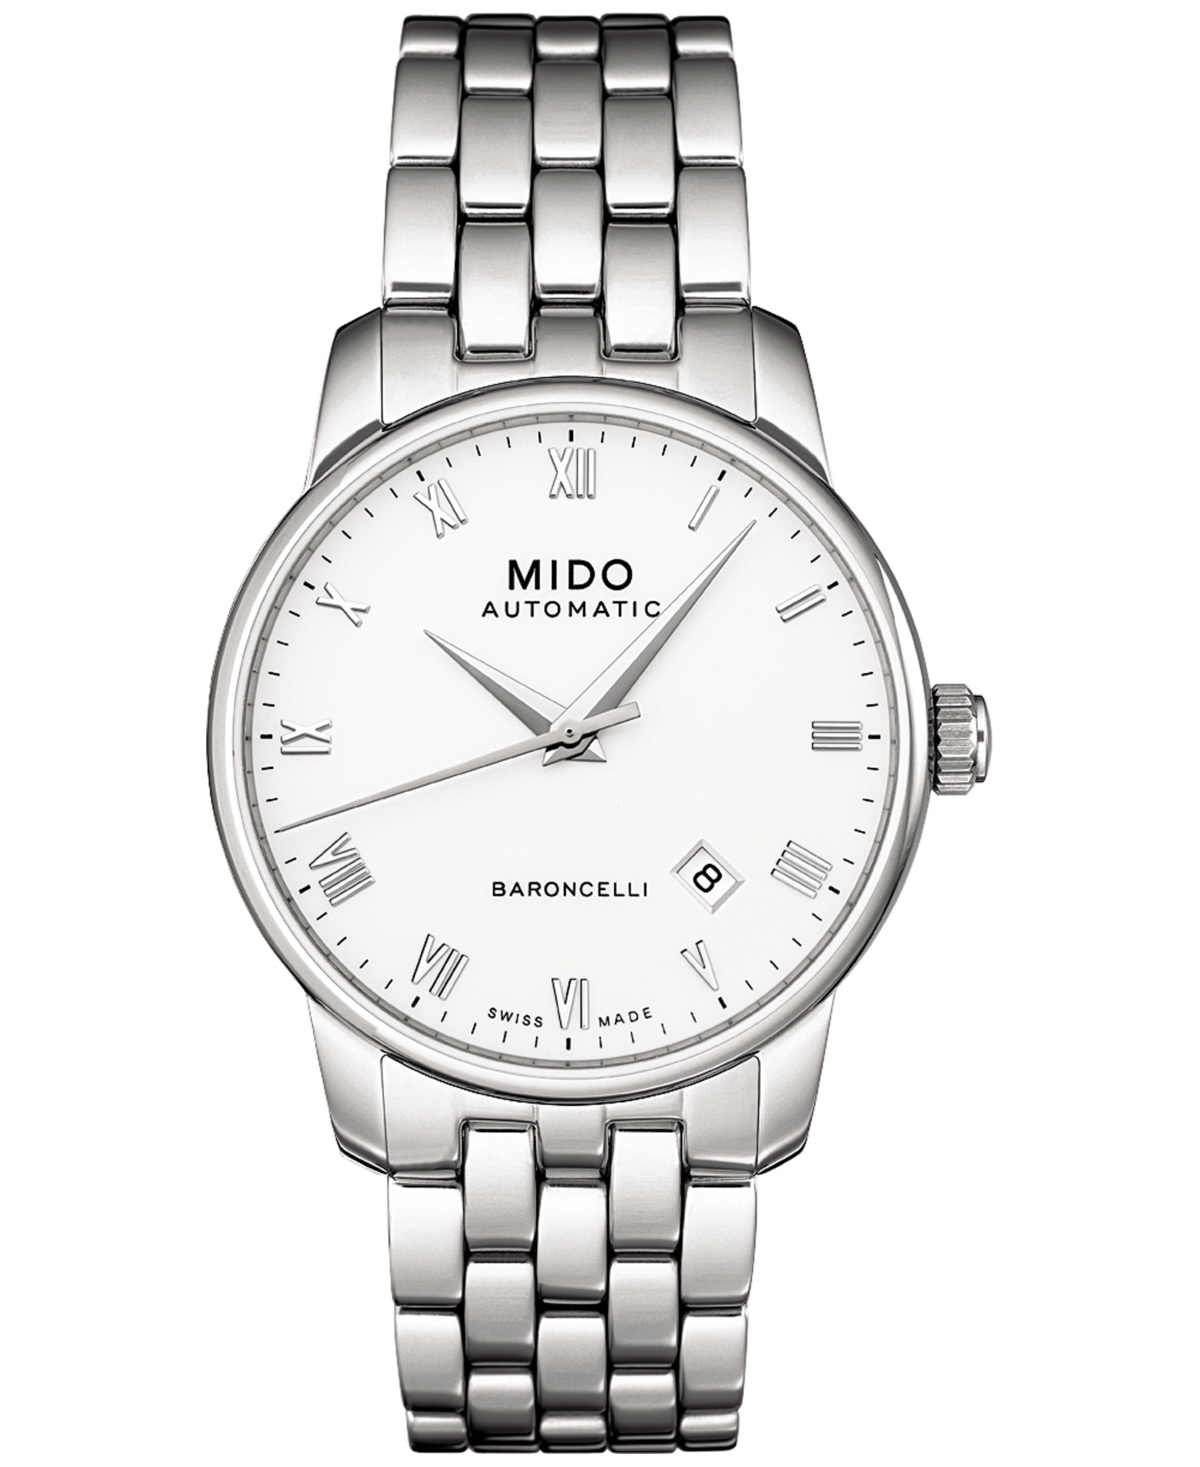 Mido Men's Swiss Automatic Baroncelli Stainless Steel Bracelet Watch 38mm In White